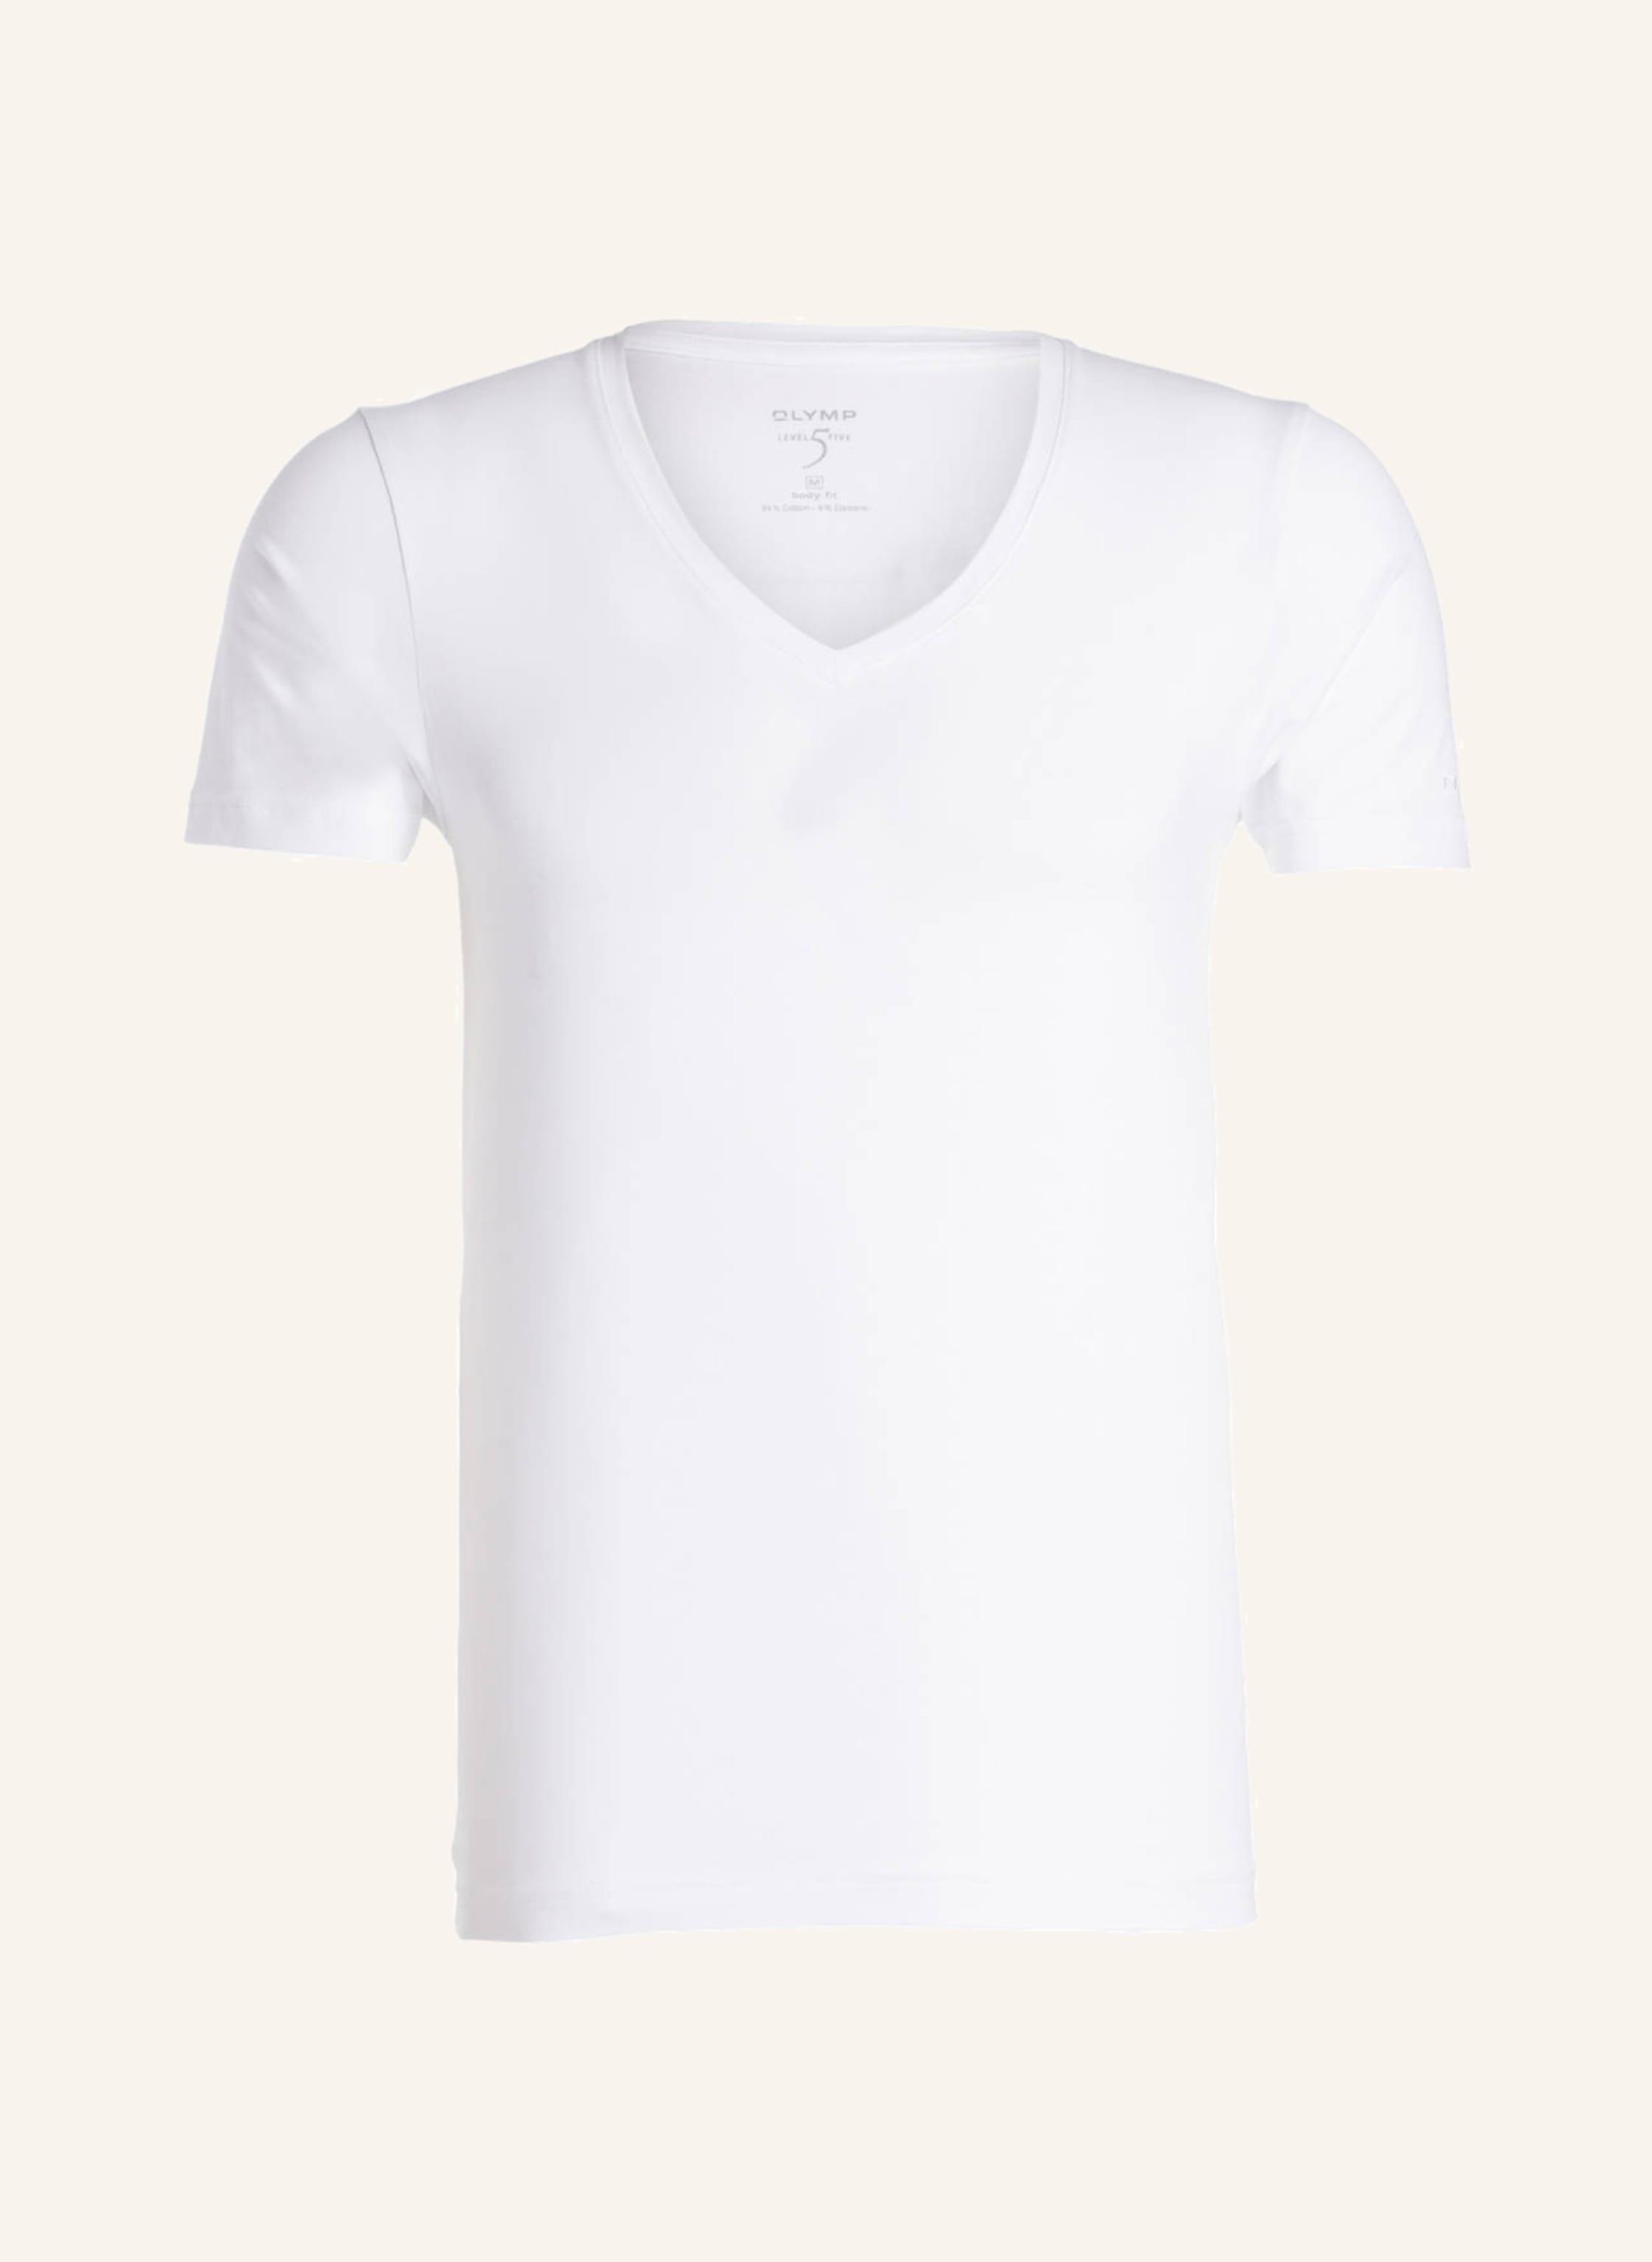 Five fit in T-Shirt body OLYMP weiss Level